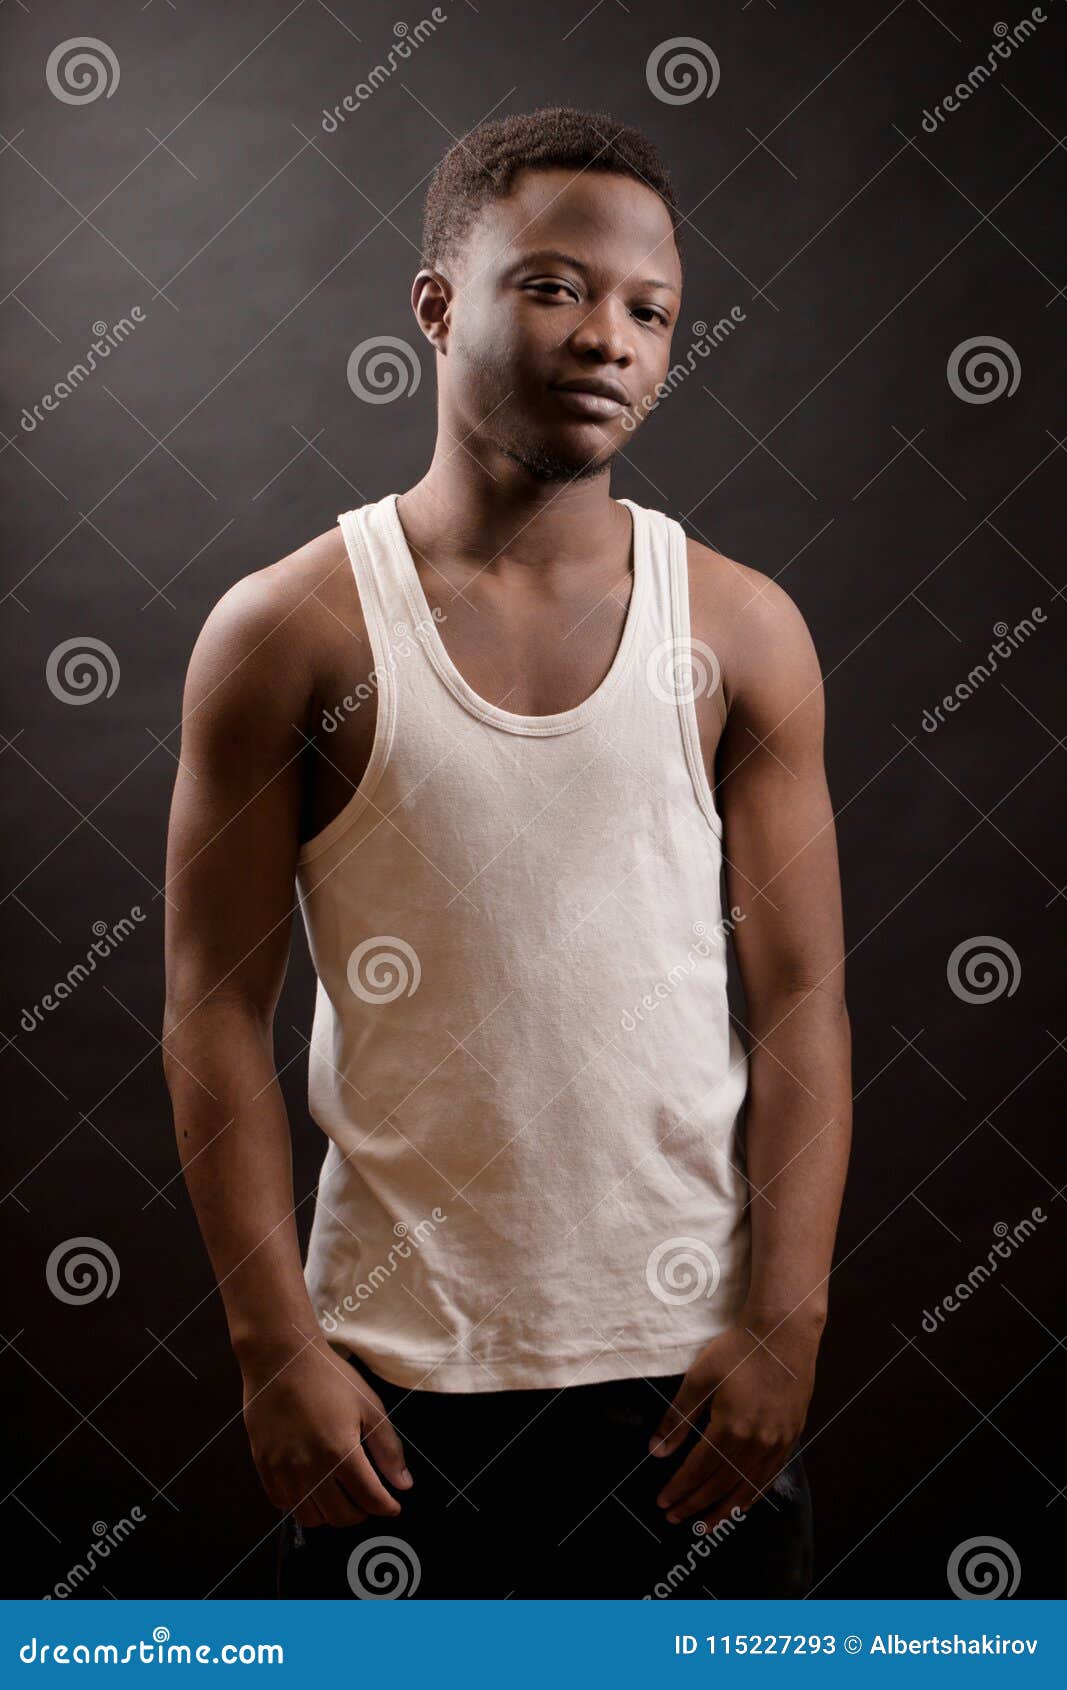 africanamerican young male with athletic body  on the black background